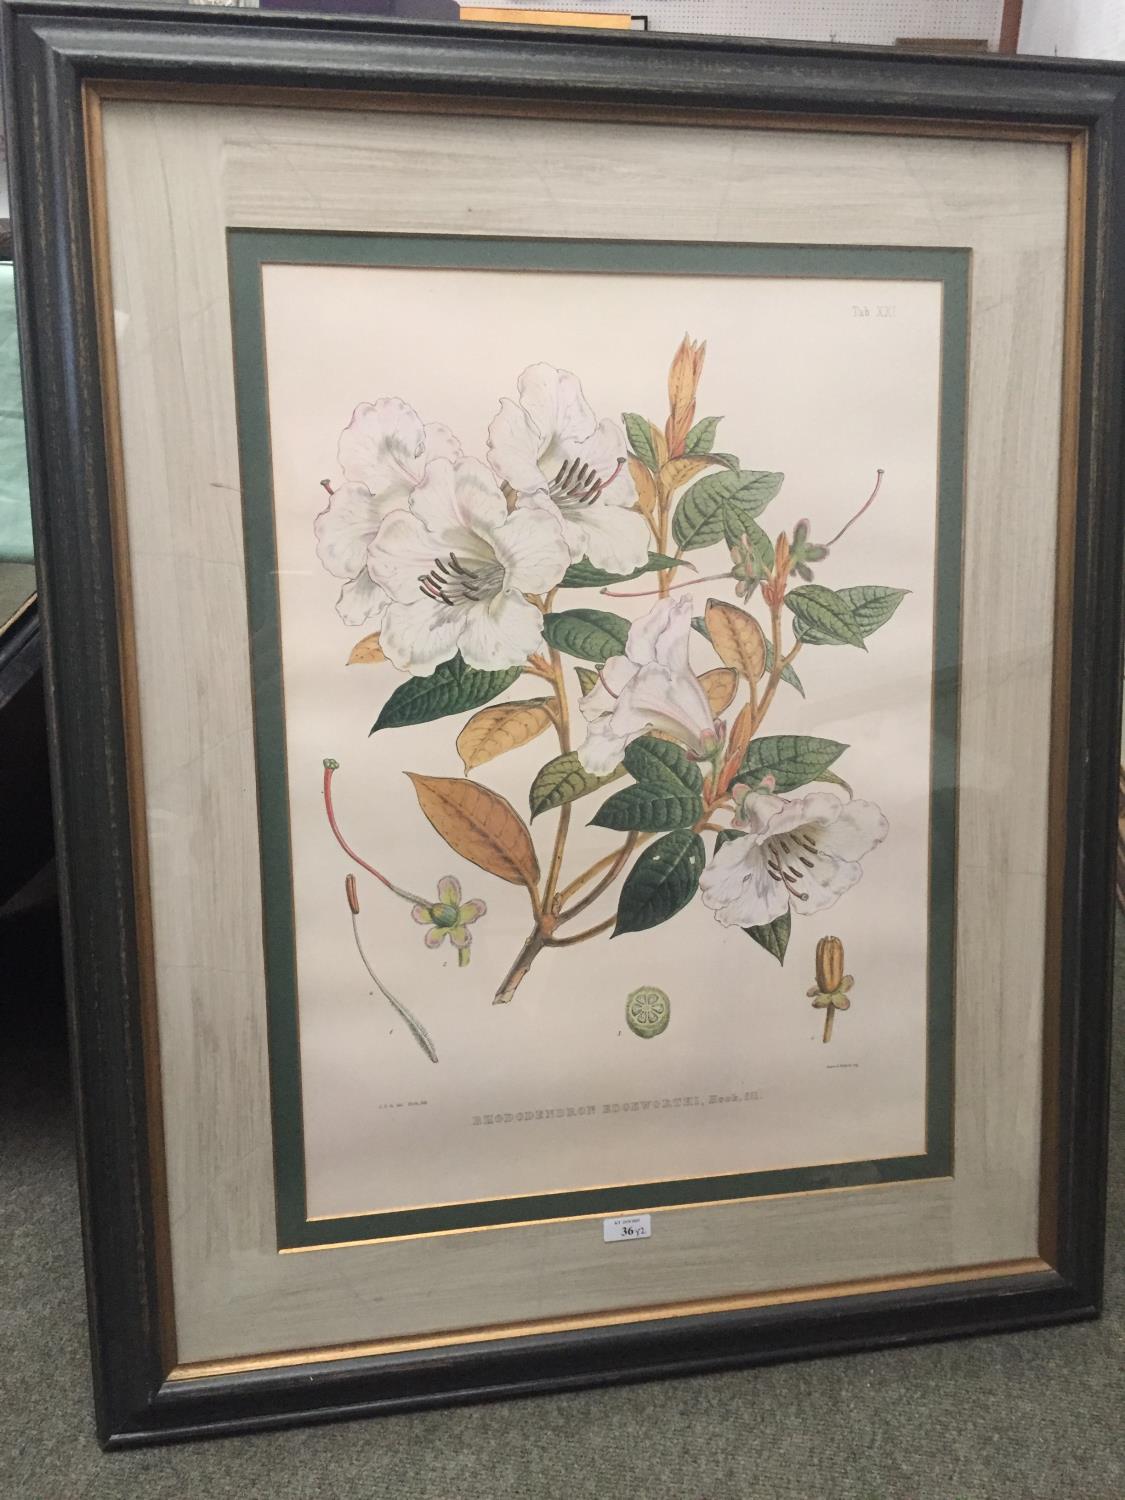 Pair of large Botanical Prints, Rhododendrons, framed and glazed, 95 x 76 including frames cm, faded - Image 4 of 12